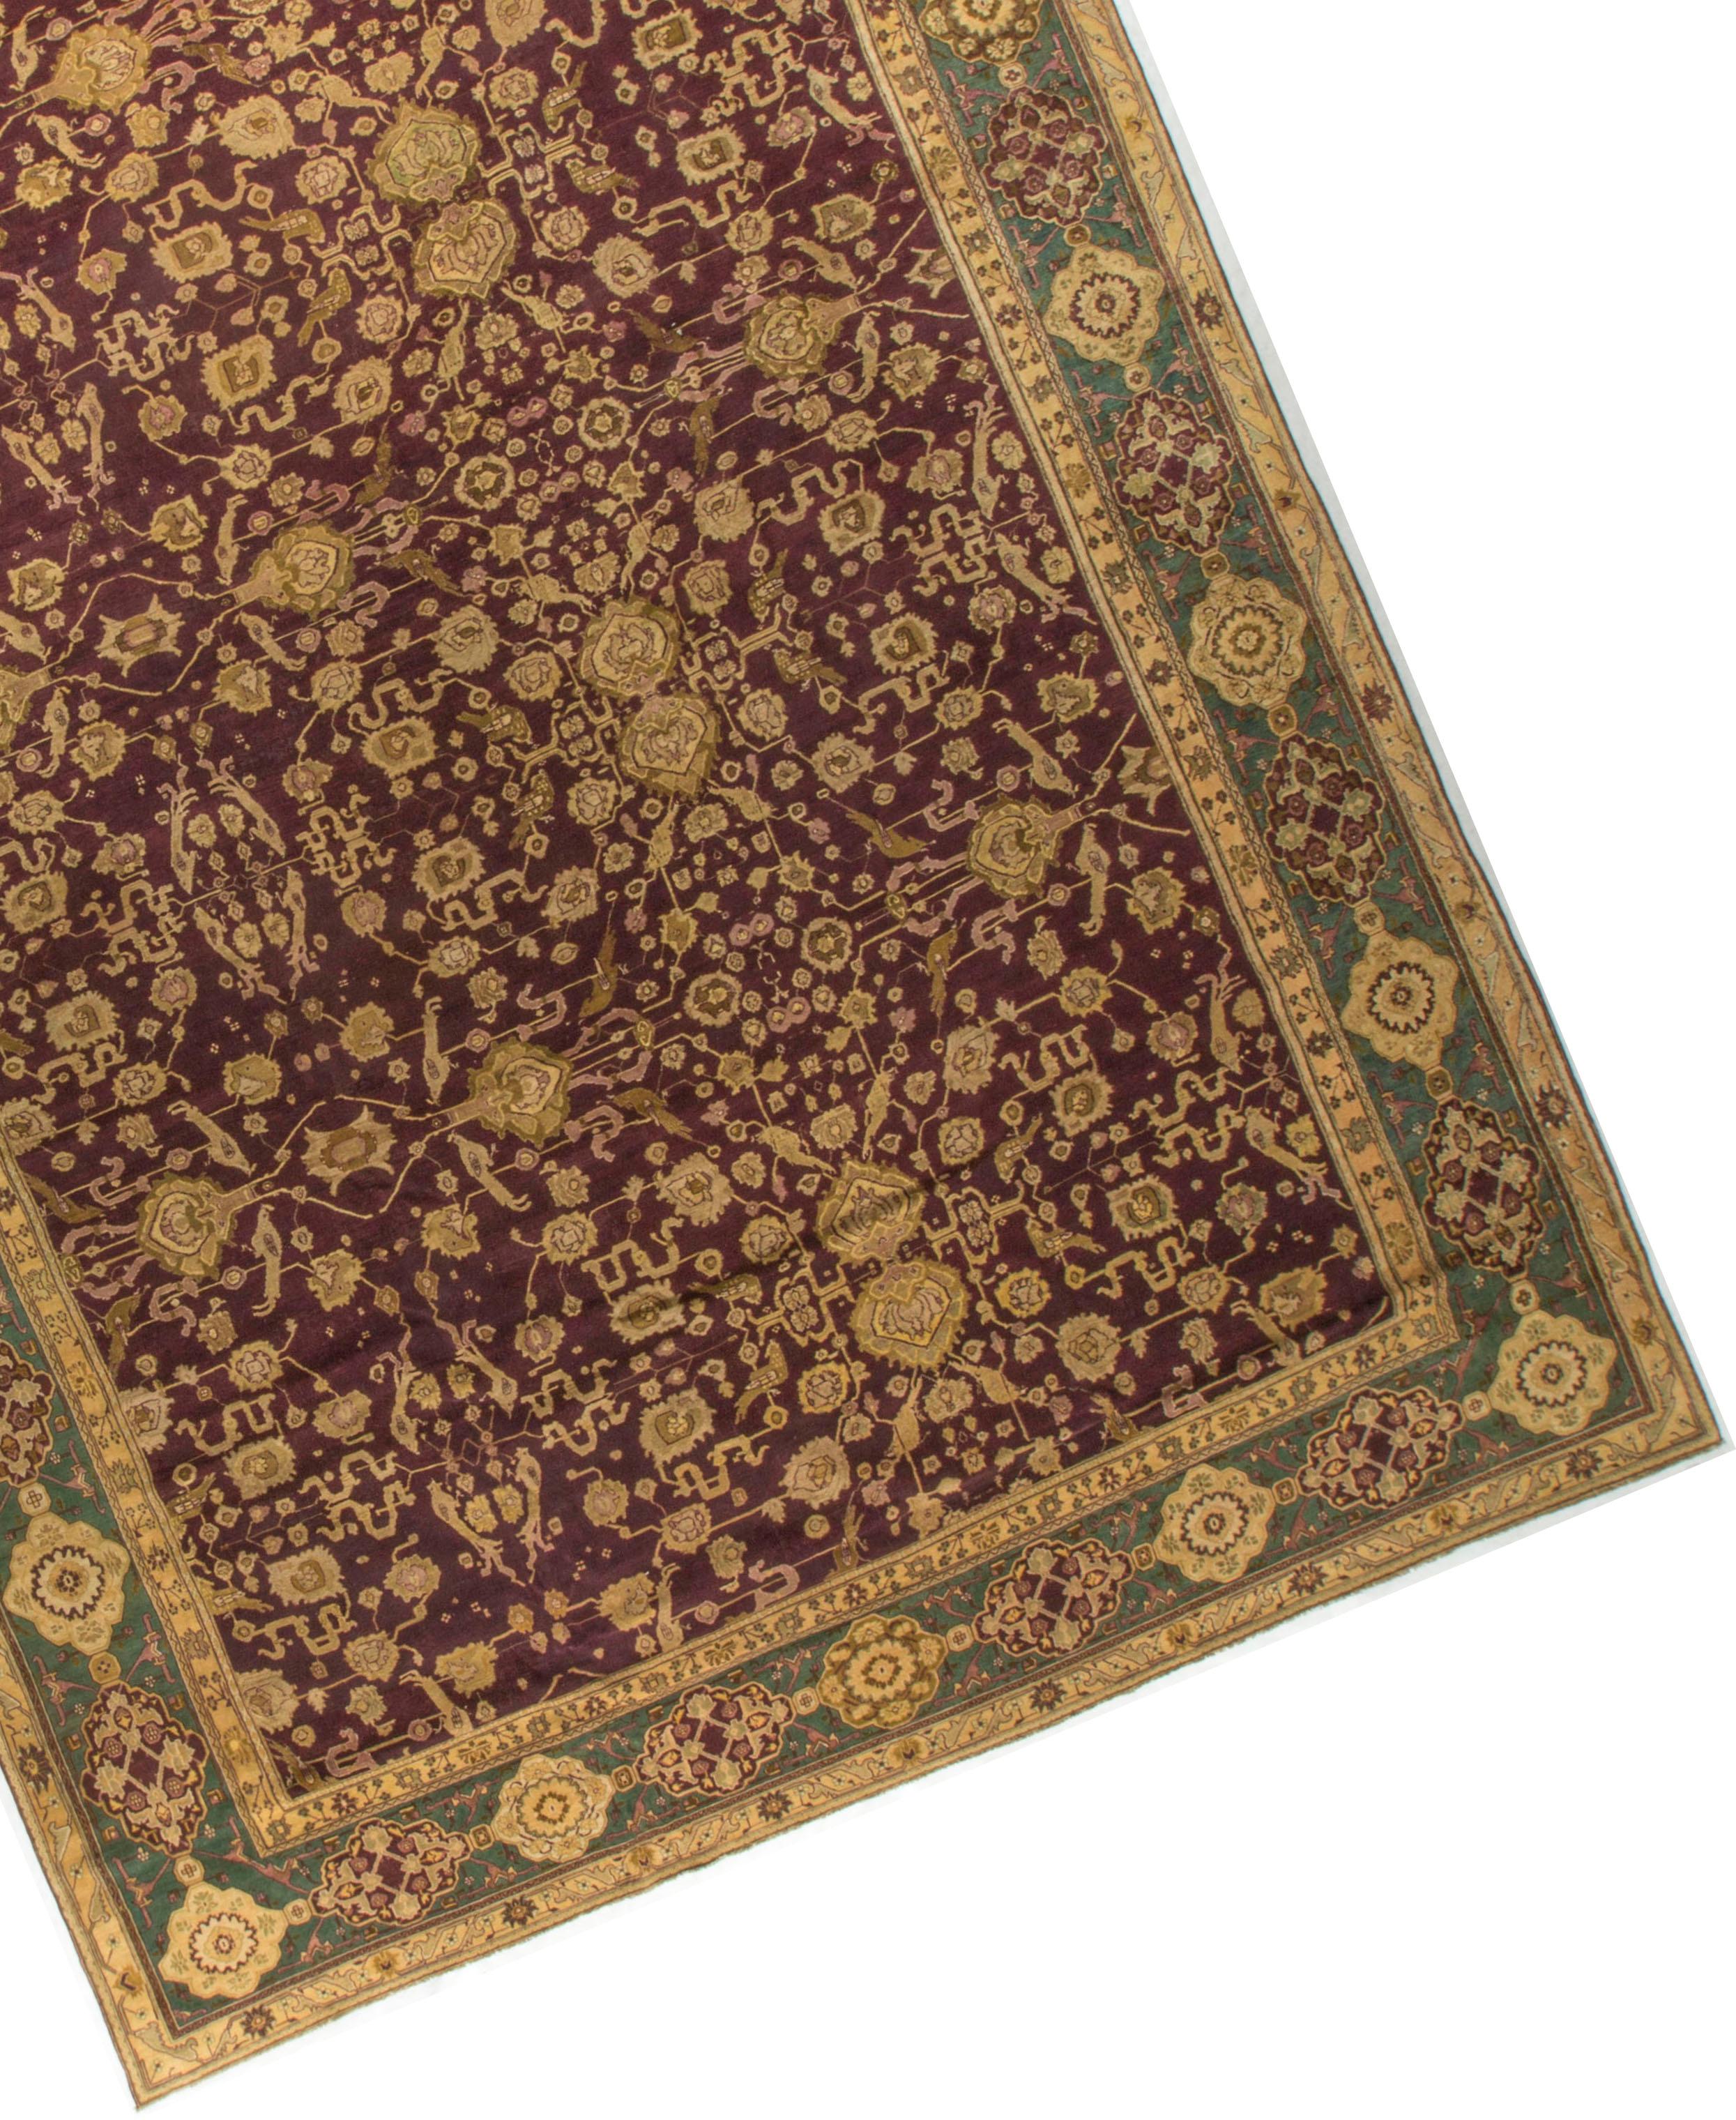 Antique Indian Agra rug, circa 1890. The field filled with floral designs of so many different styles, is so well offset by the green border. The weaving and design skills used in the central theme is truly outstanding.Agra carpets are fine rugs of